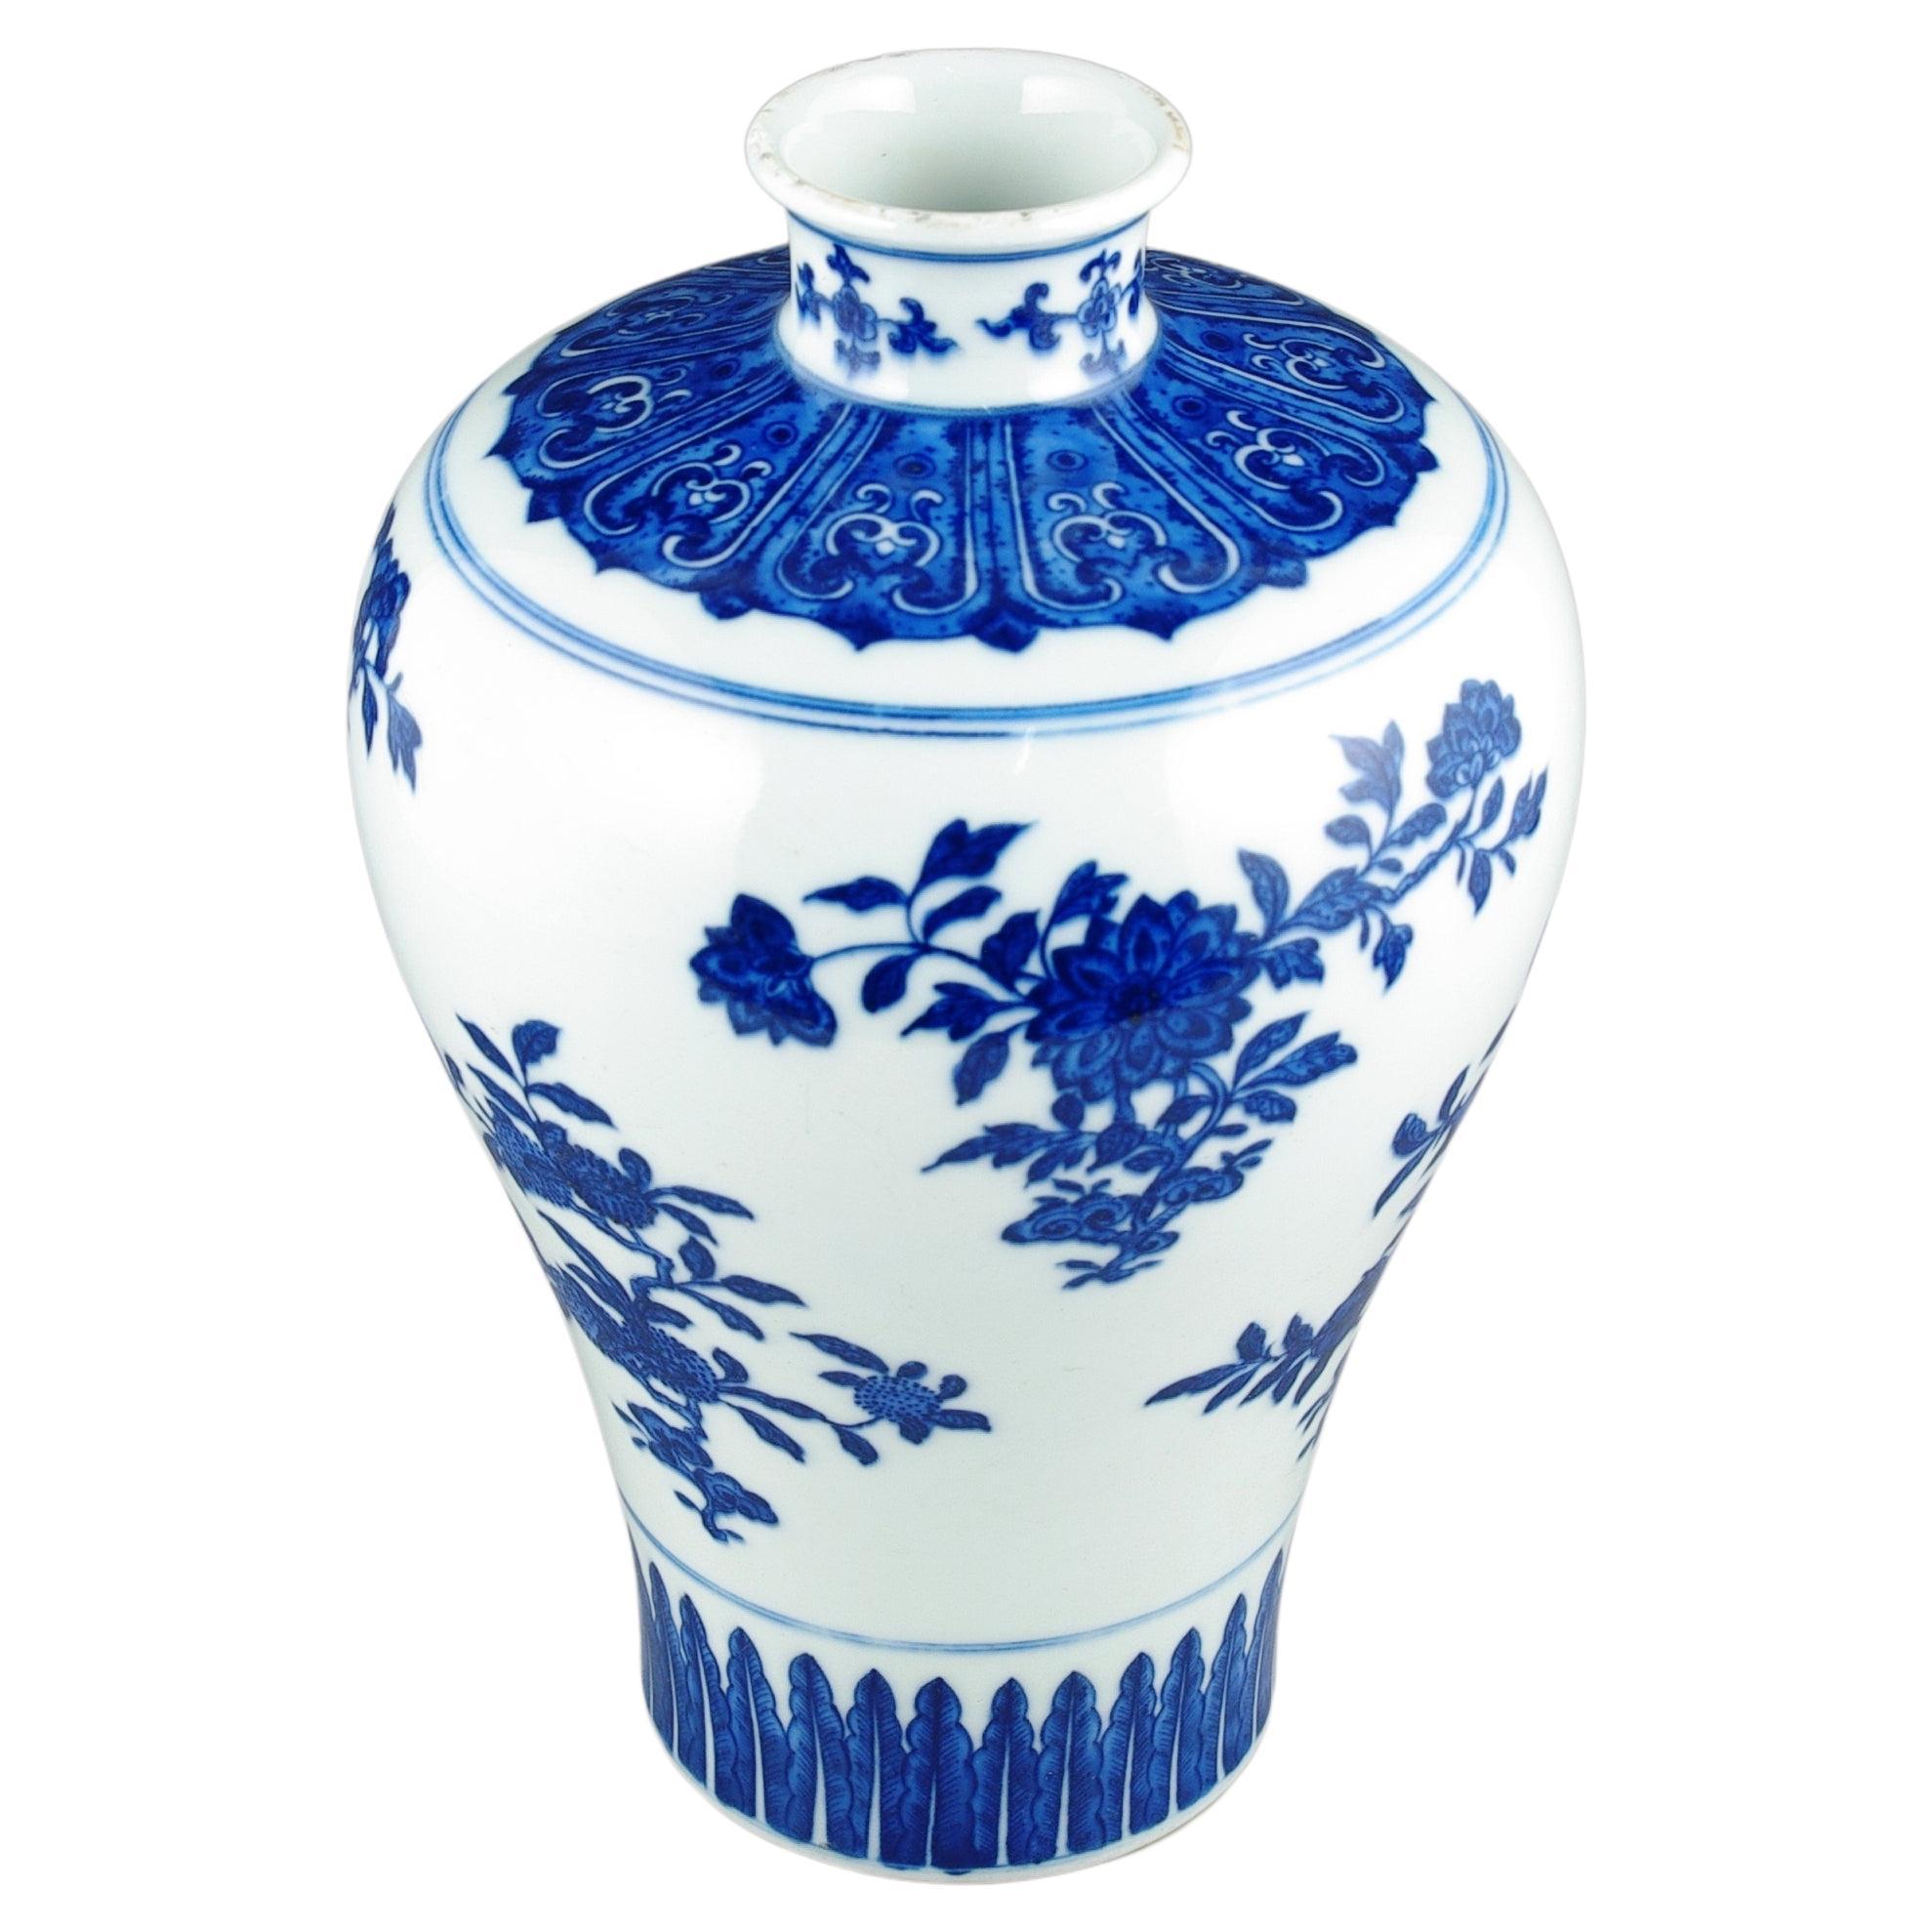 Large Chinese Porcelain Underglaze Blue & White Meiping Vase in Qing Style 20c In Excellent Condition For Sale In Richmond, CA